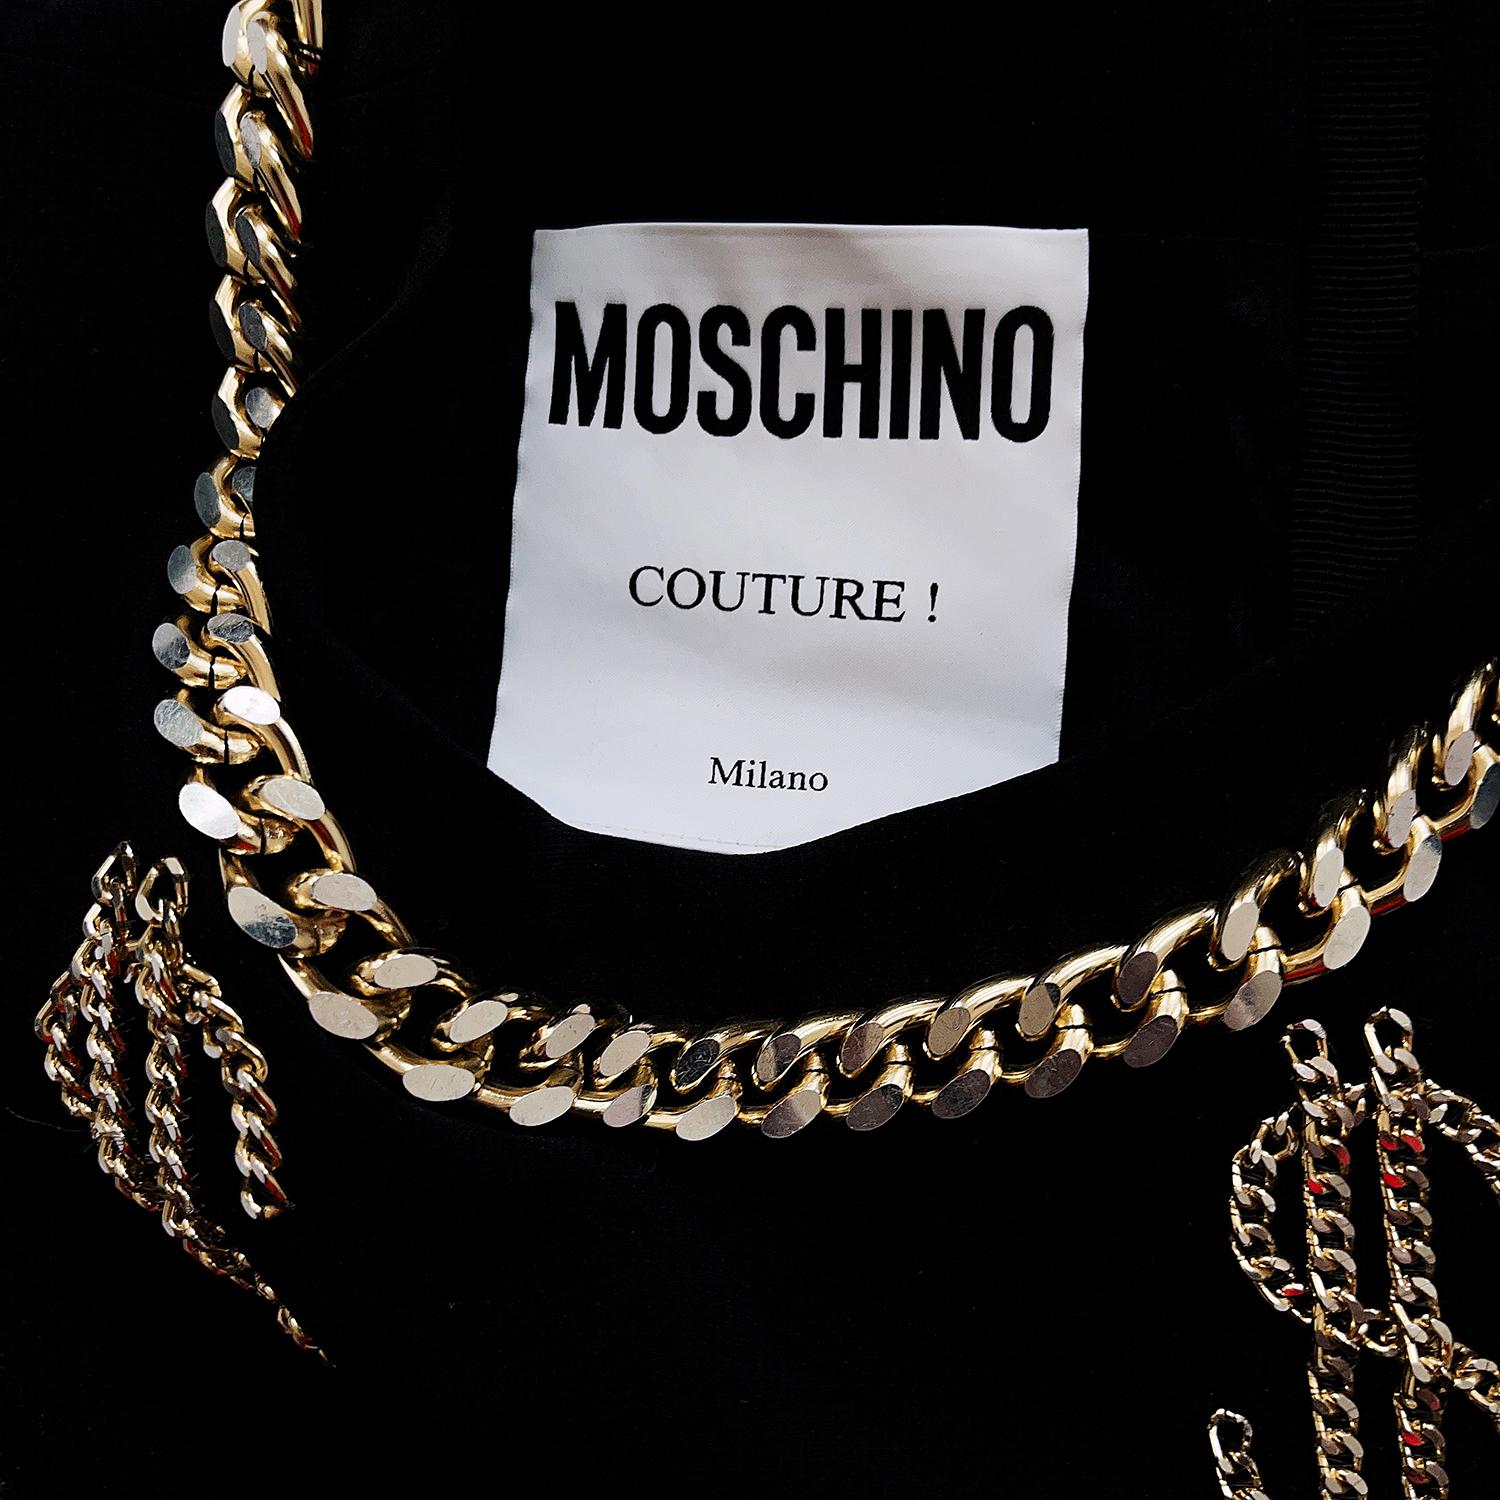 Women's Iconic MOSCHINO Couture Dollar Sign Ensembe Black Dress Jacket Gold Chain Set  For Sale